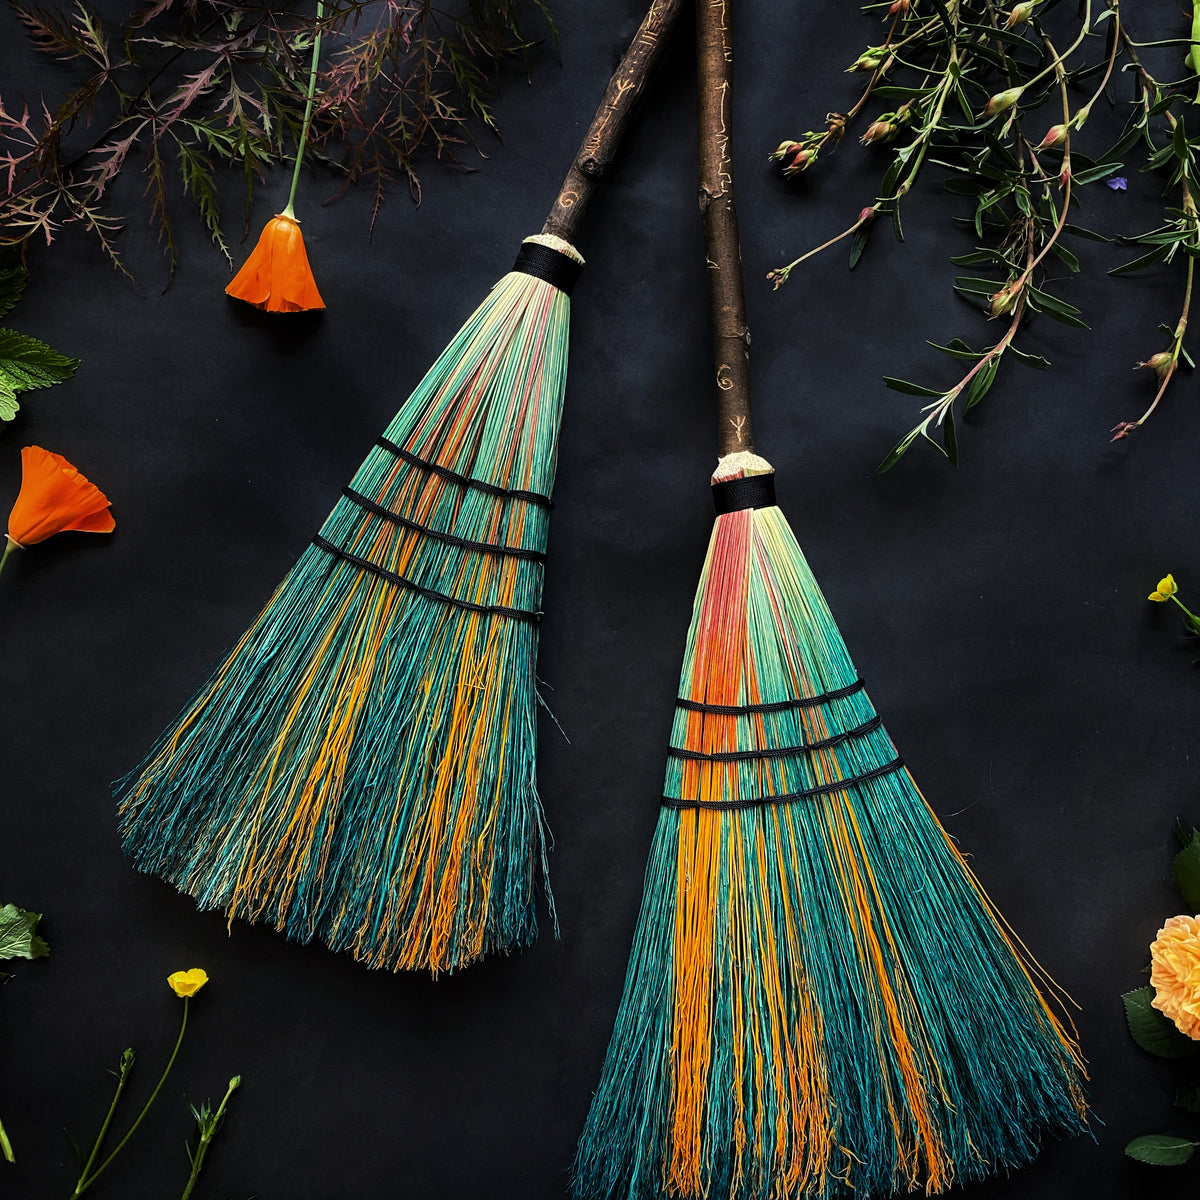 Light as a Feather Two-Tone Sweeper Brooms